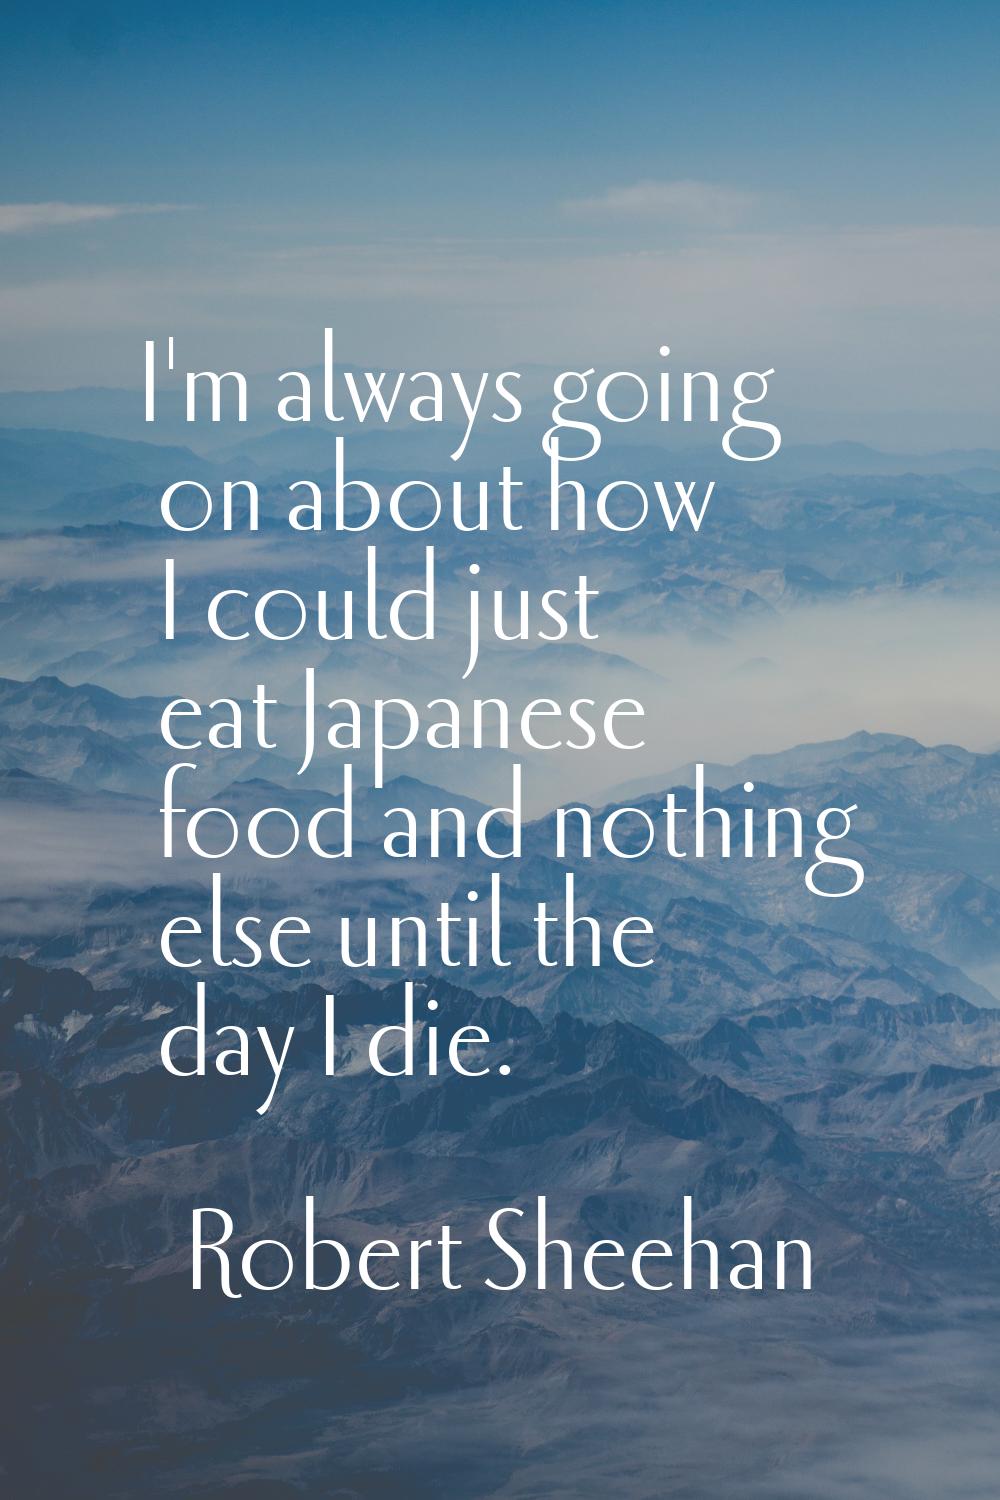 I'm always going on about how I could just eat Japanese food and nothing else until the day I die.